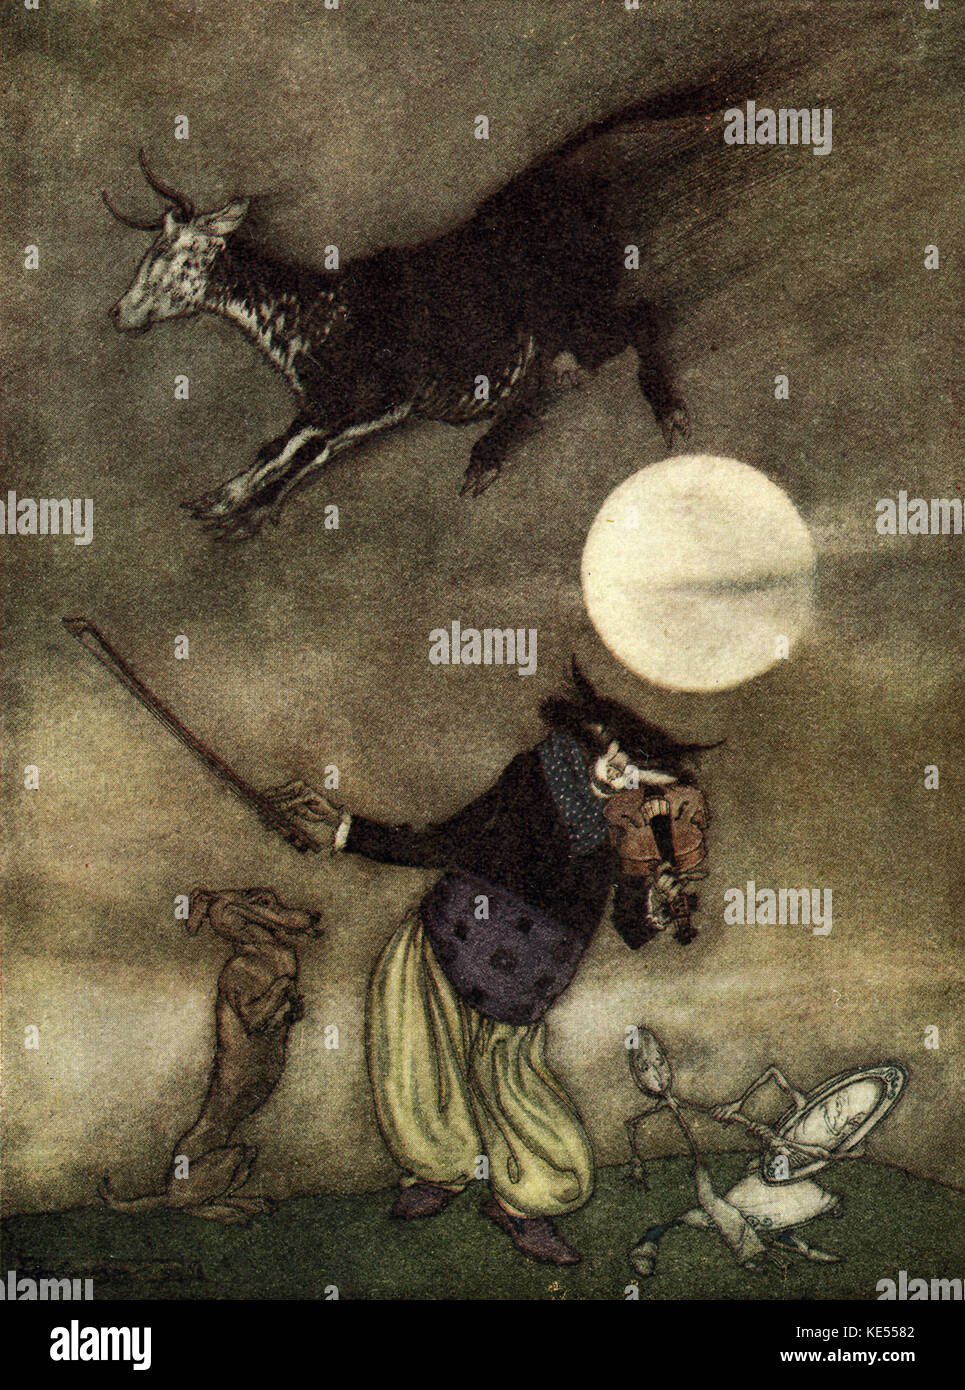 Hey! Diddle, diddle! The cat and the fiddle, The cow jumped over the moon: the little dog laugh'd So see such sport, And the dish ran away with the spoon' - nursery rhyme.  Illustration  by Arthur Rackham.  English book illustrator 19 September 1867 – 6 September 1939. Stock Photo